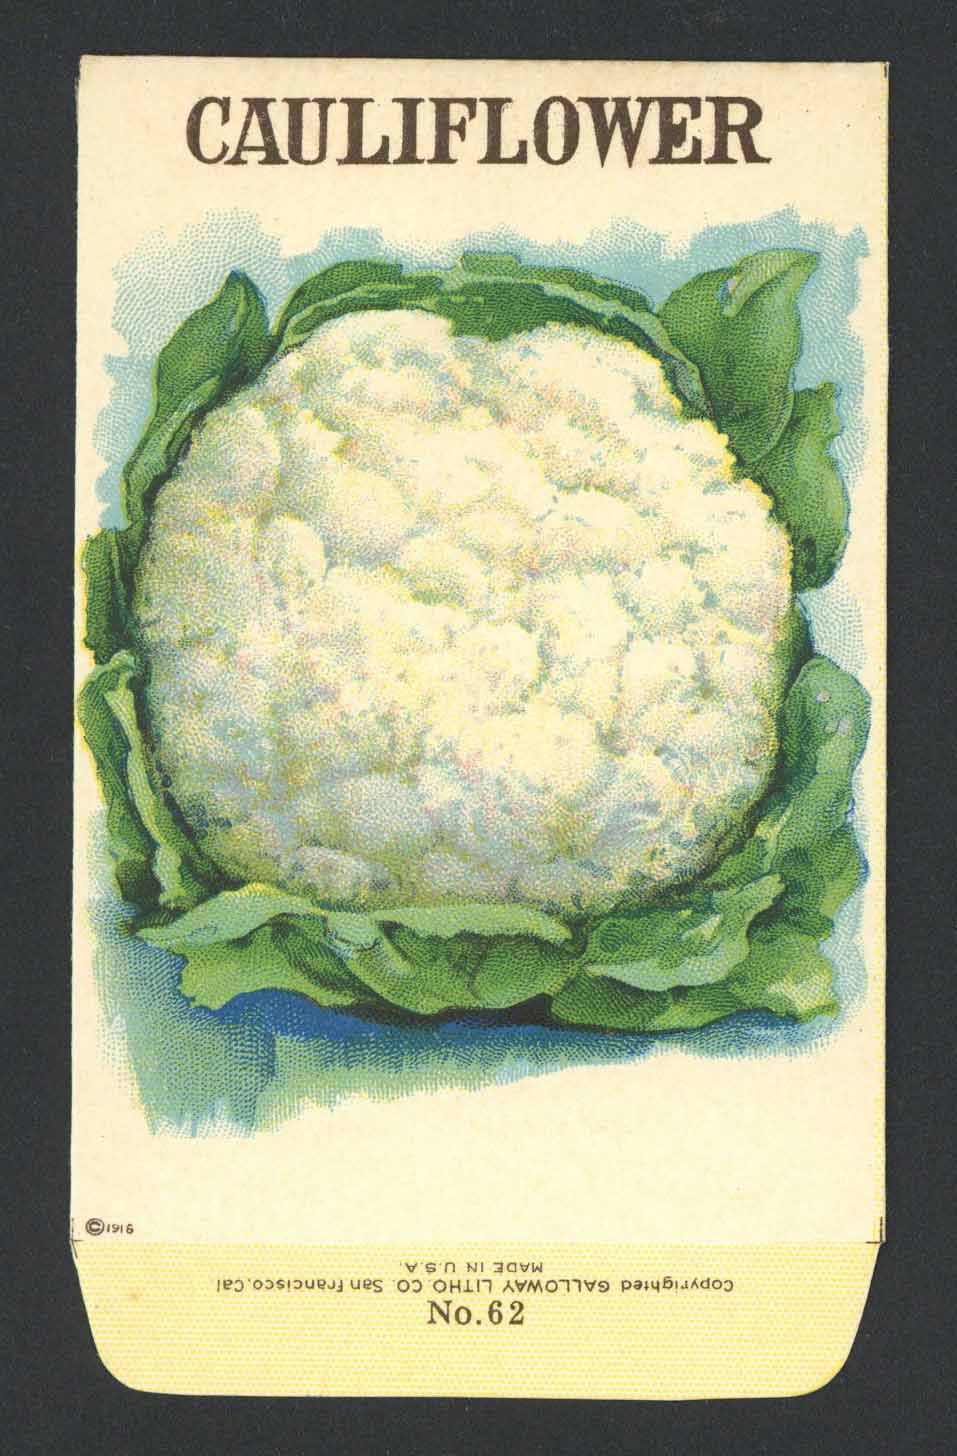 Cauliflower Antique Stock Seed Packet